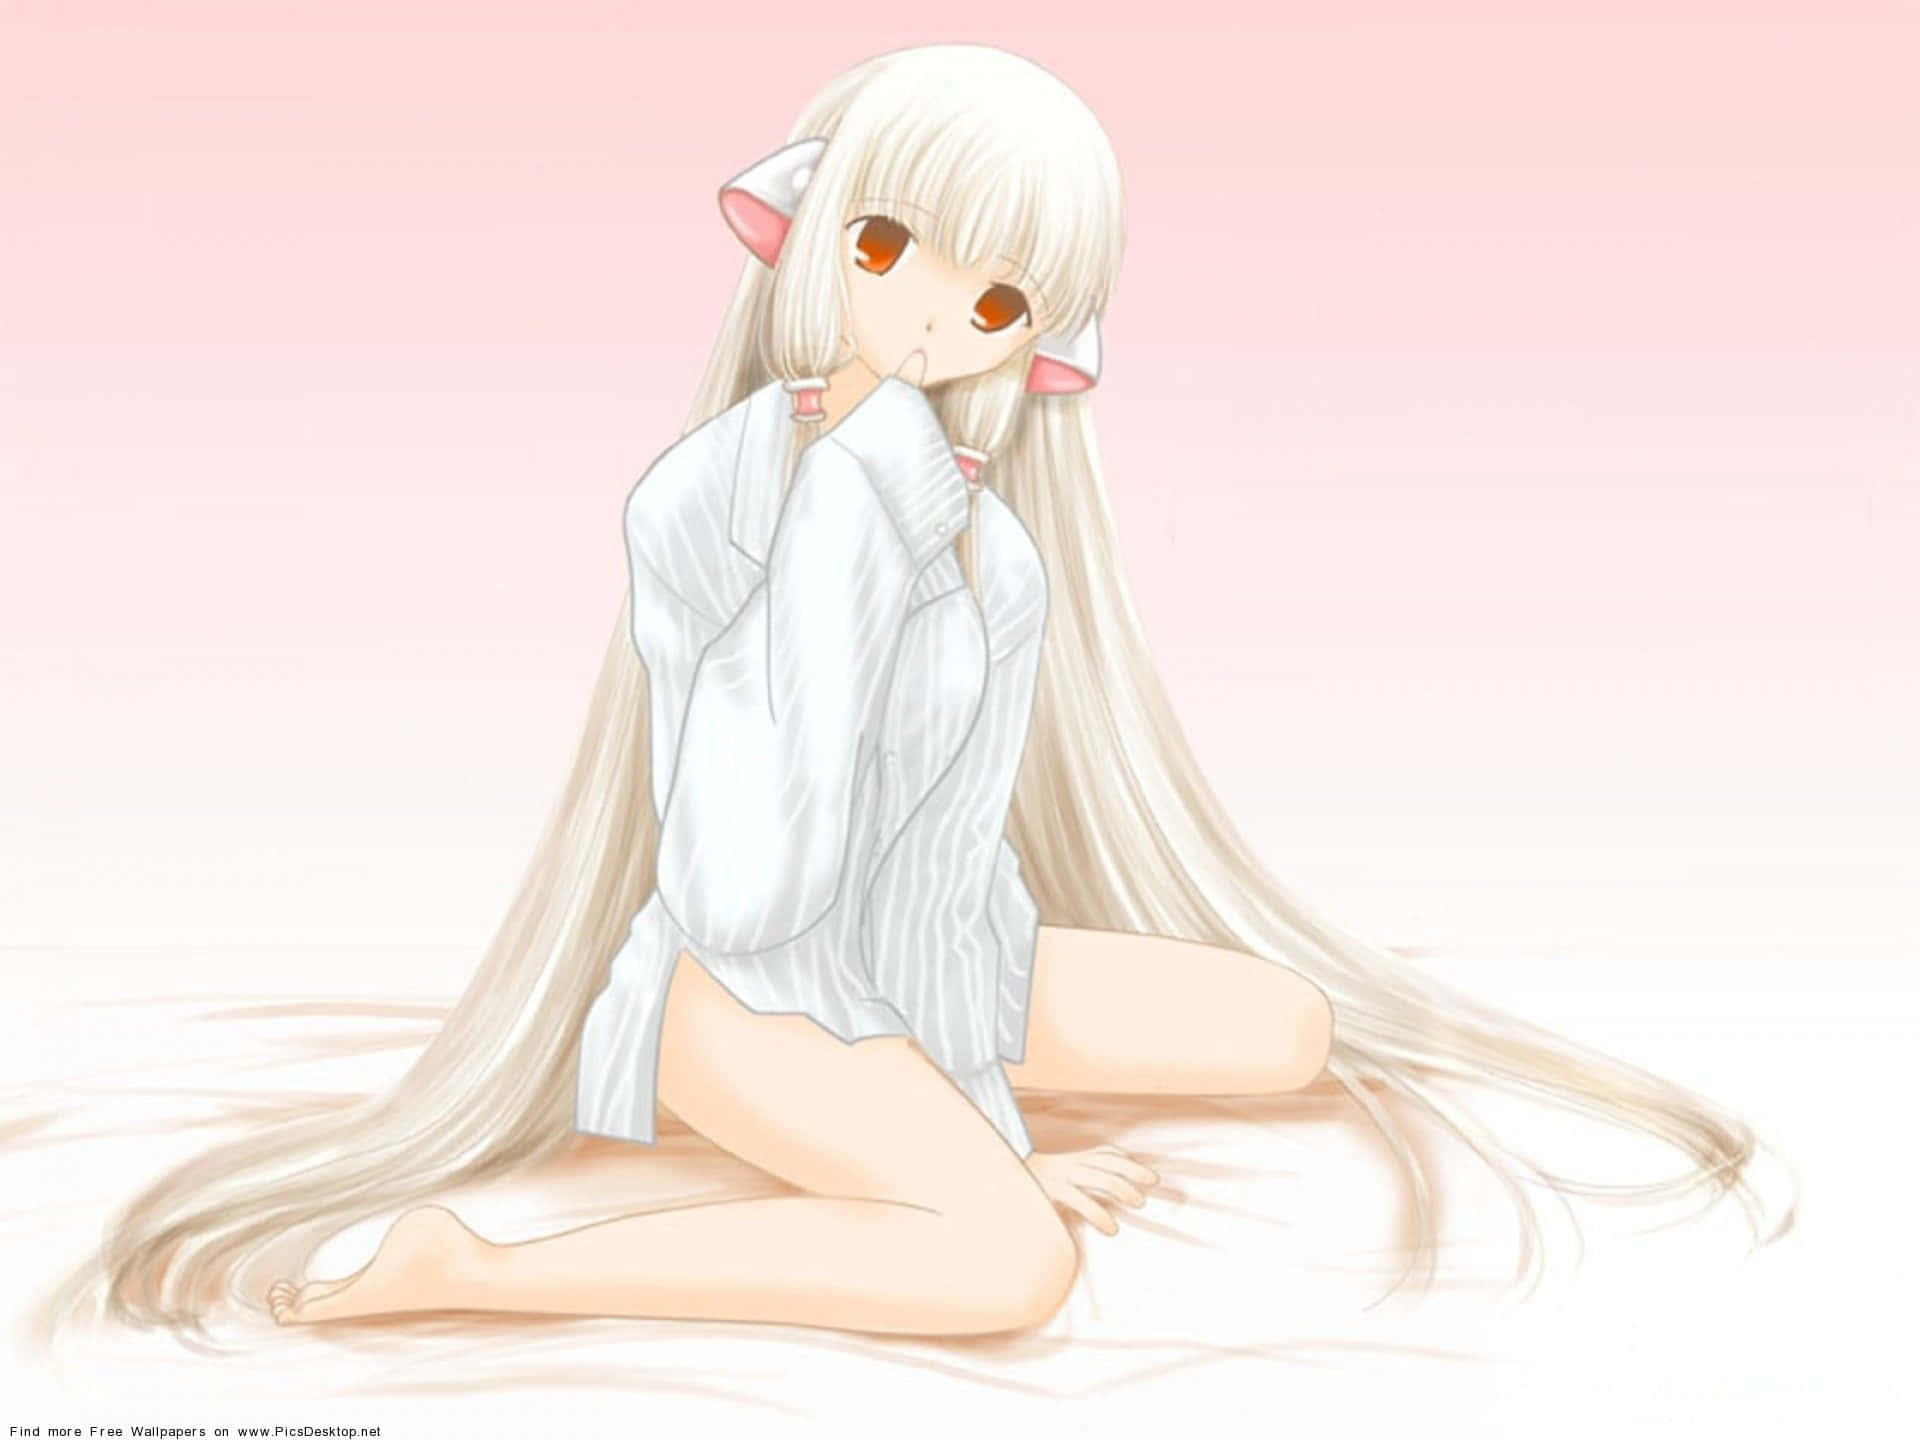 A Girl With Long Hair Sitting On A Bed